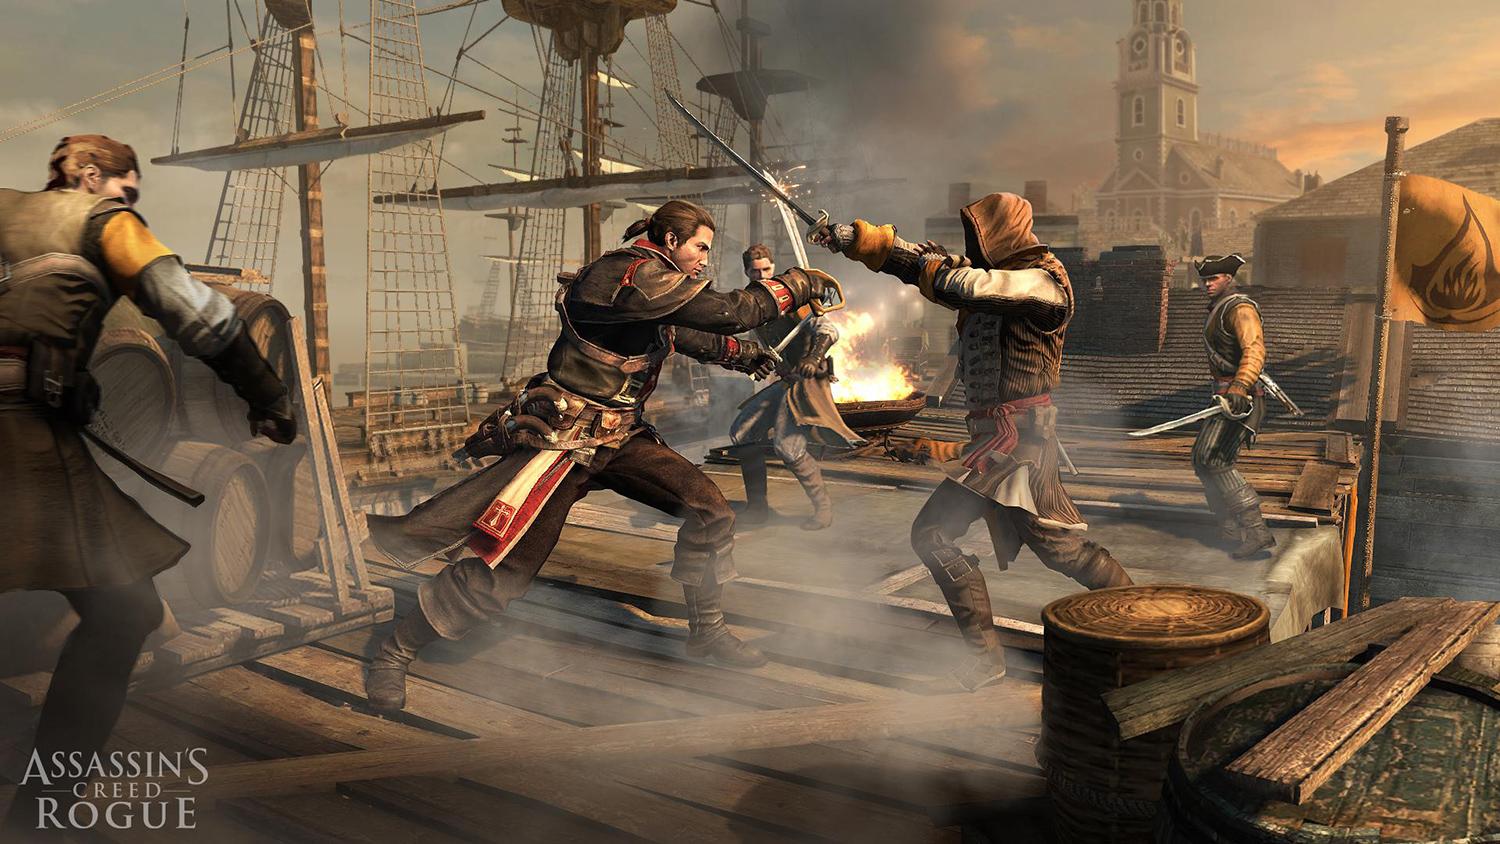 Assassin's Creed Rogue Remastered' Coming To Xbox One, PS4